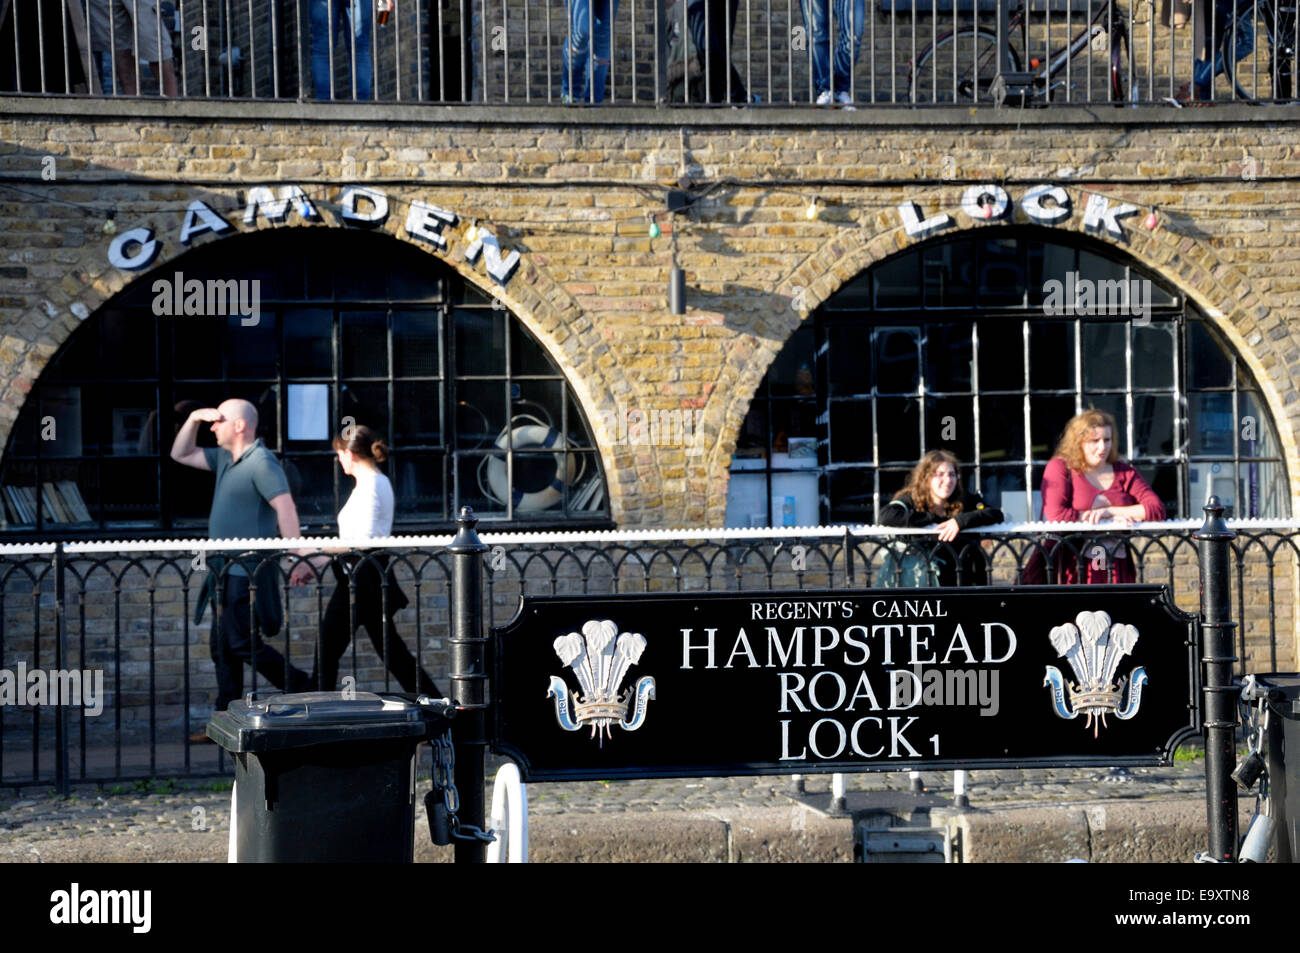 Londres, Angleterre, Royaume-Uni. Hampstead Road, Camden Lock. Regent's Canal Banque D'Images